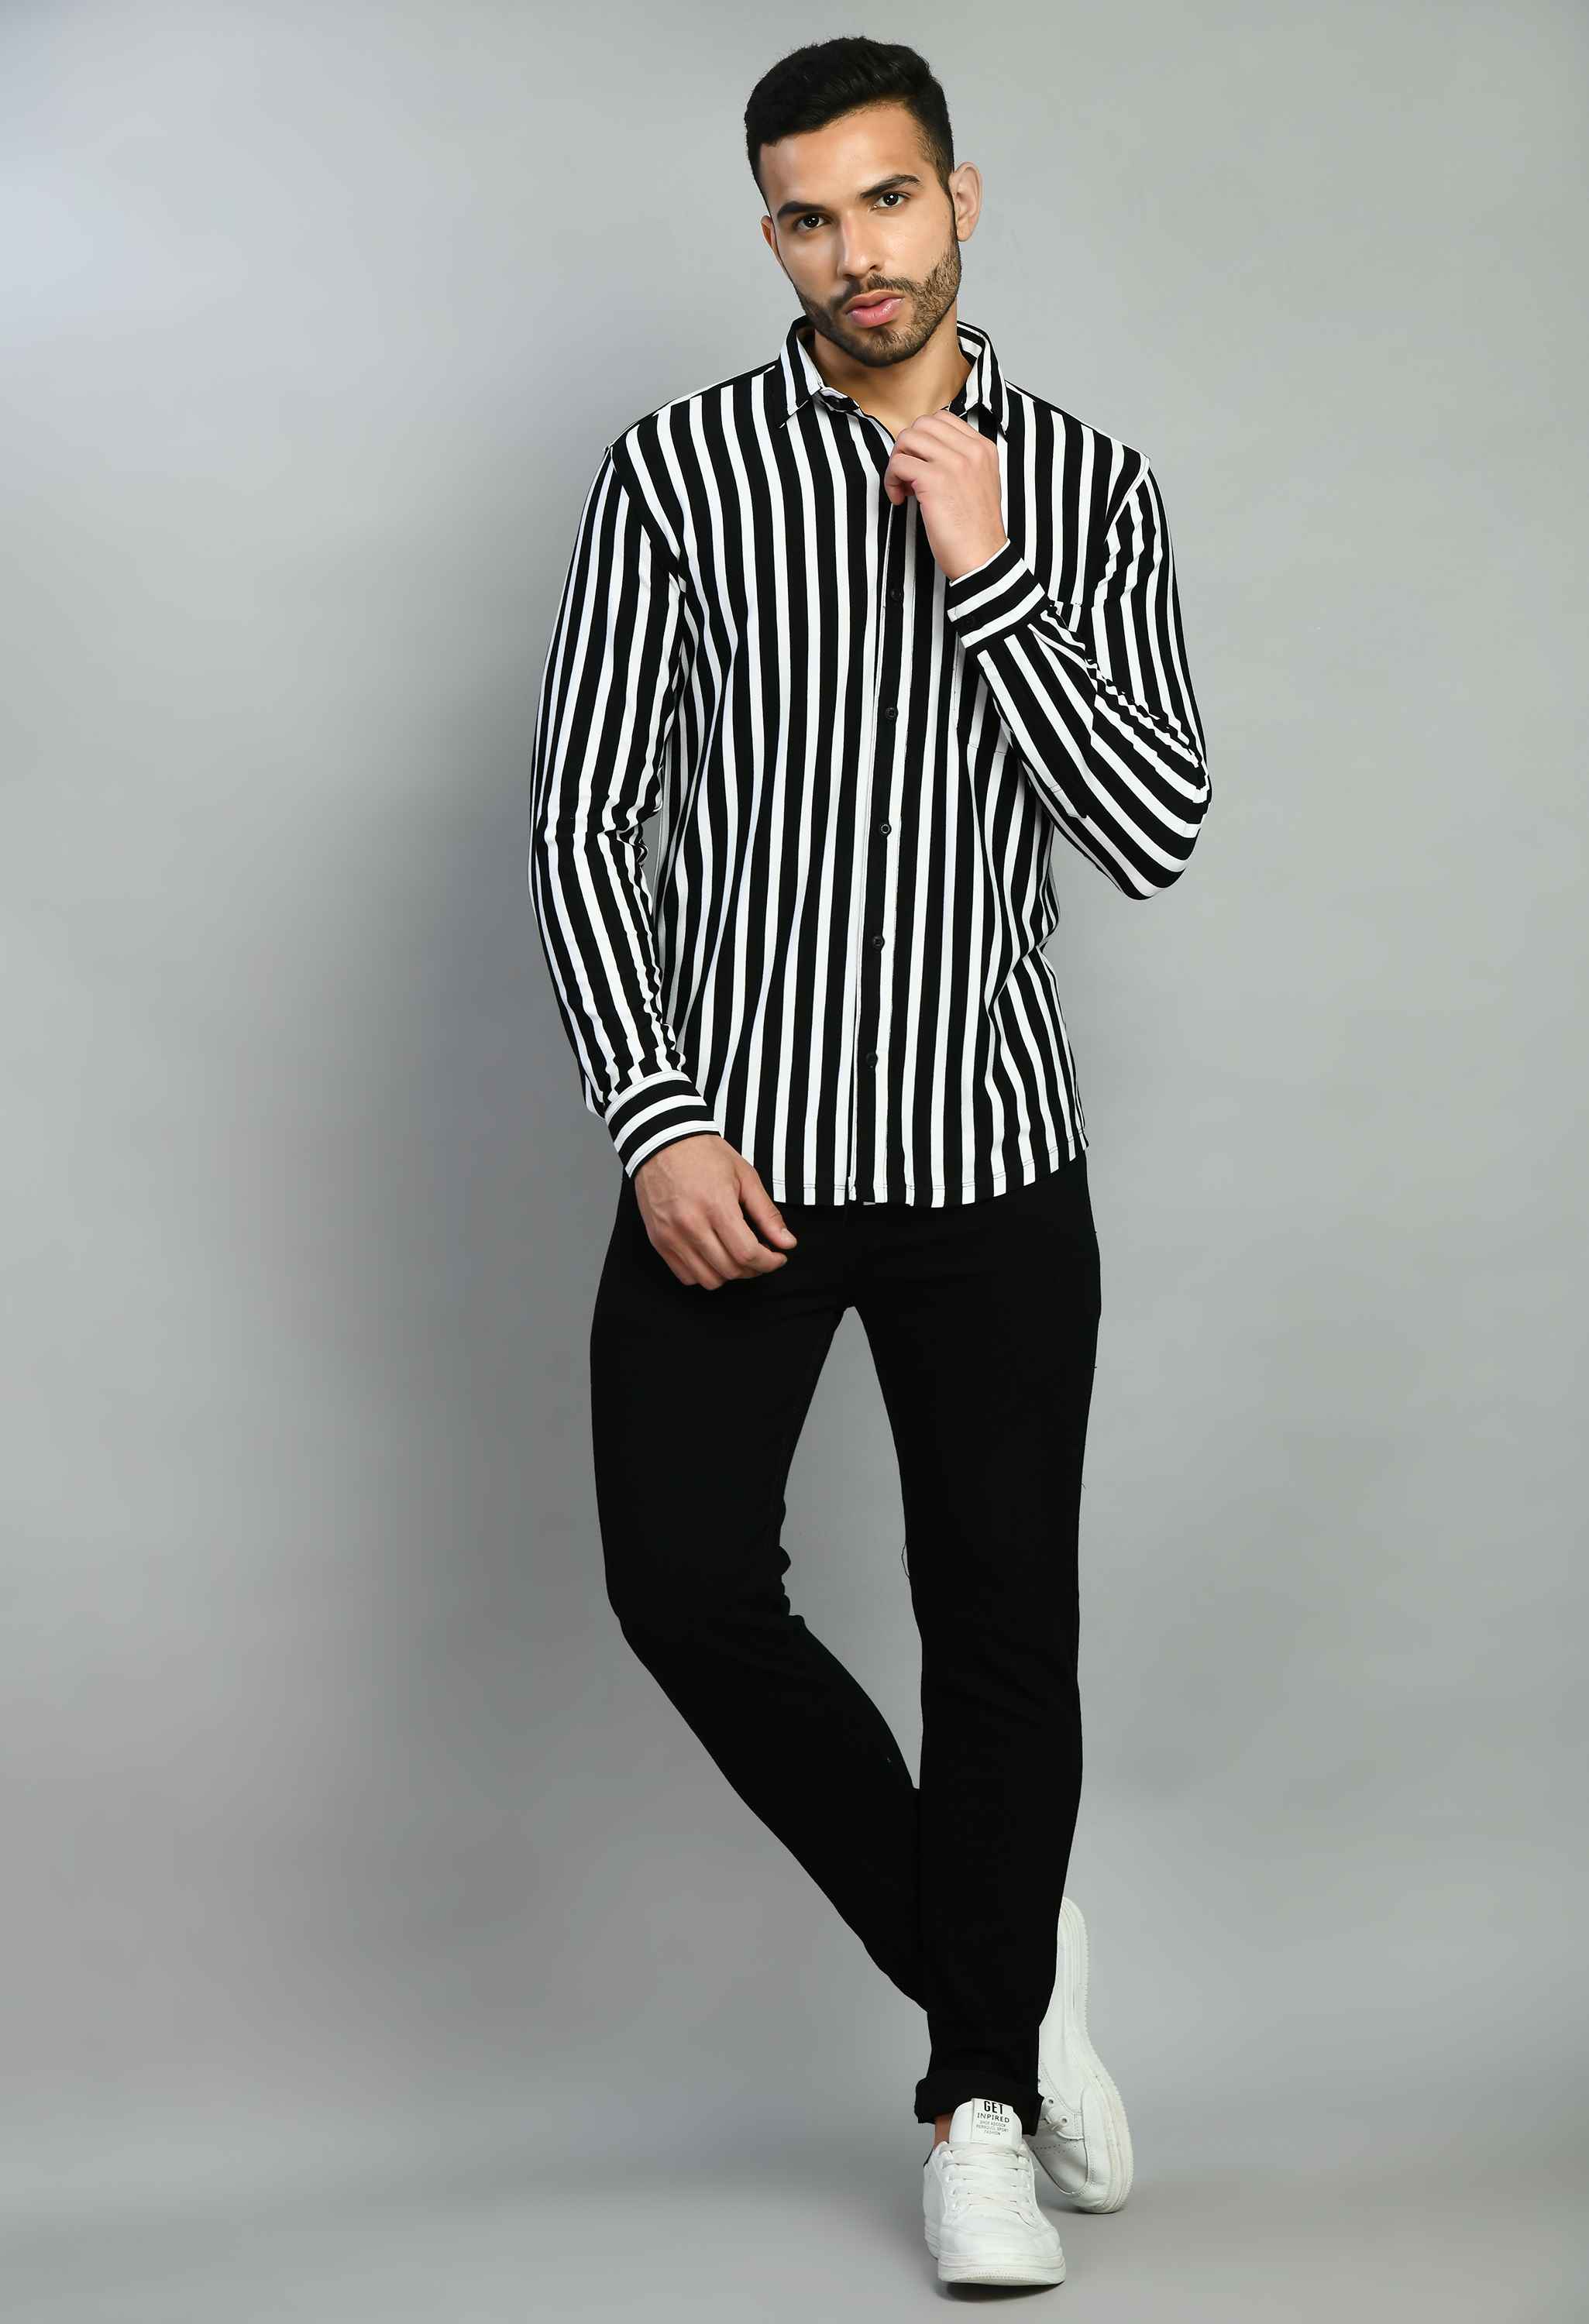 Black and White Casual Shirt for Men - SQUIREHOOD